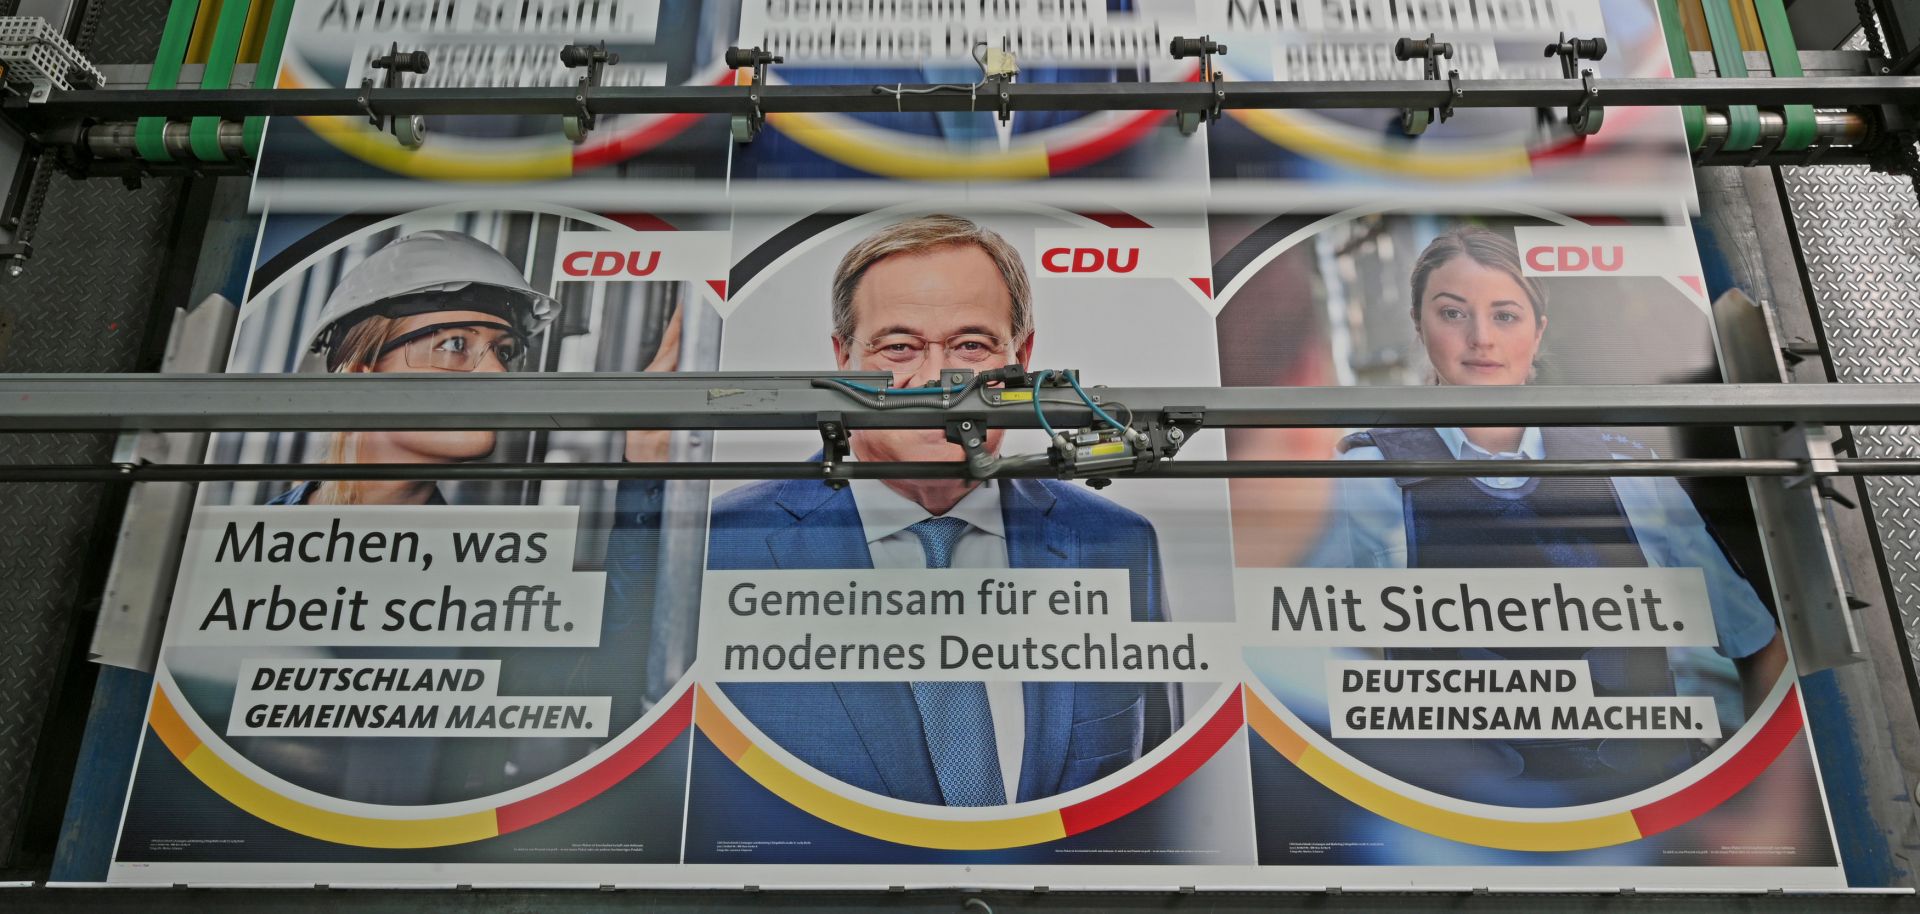 Campaign billboards for the Christian Democratic Union (CDU) candidates running in the September federal election are printed in Schloss Holte-Stukenbrock, Germany, on June 29, 2021. 